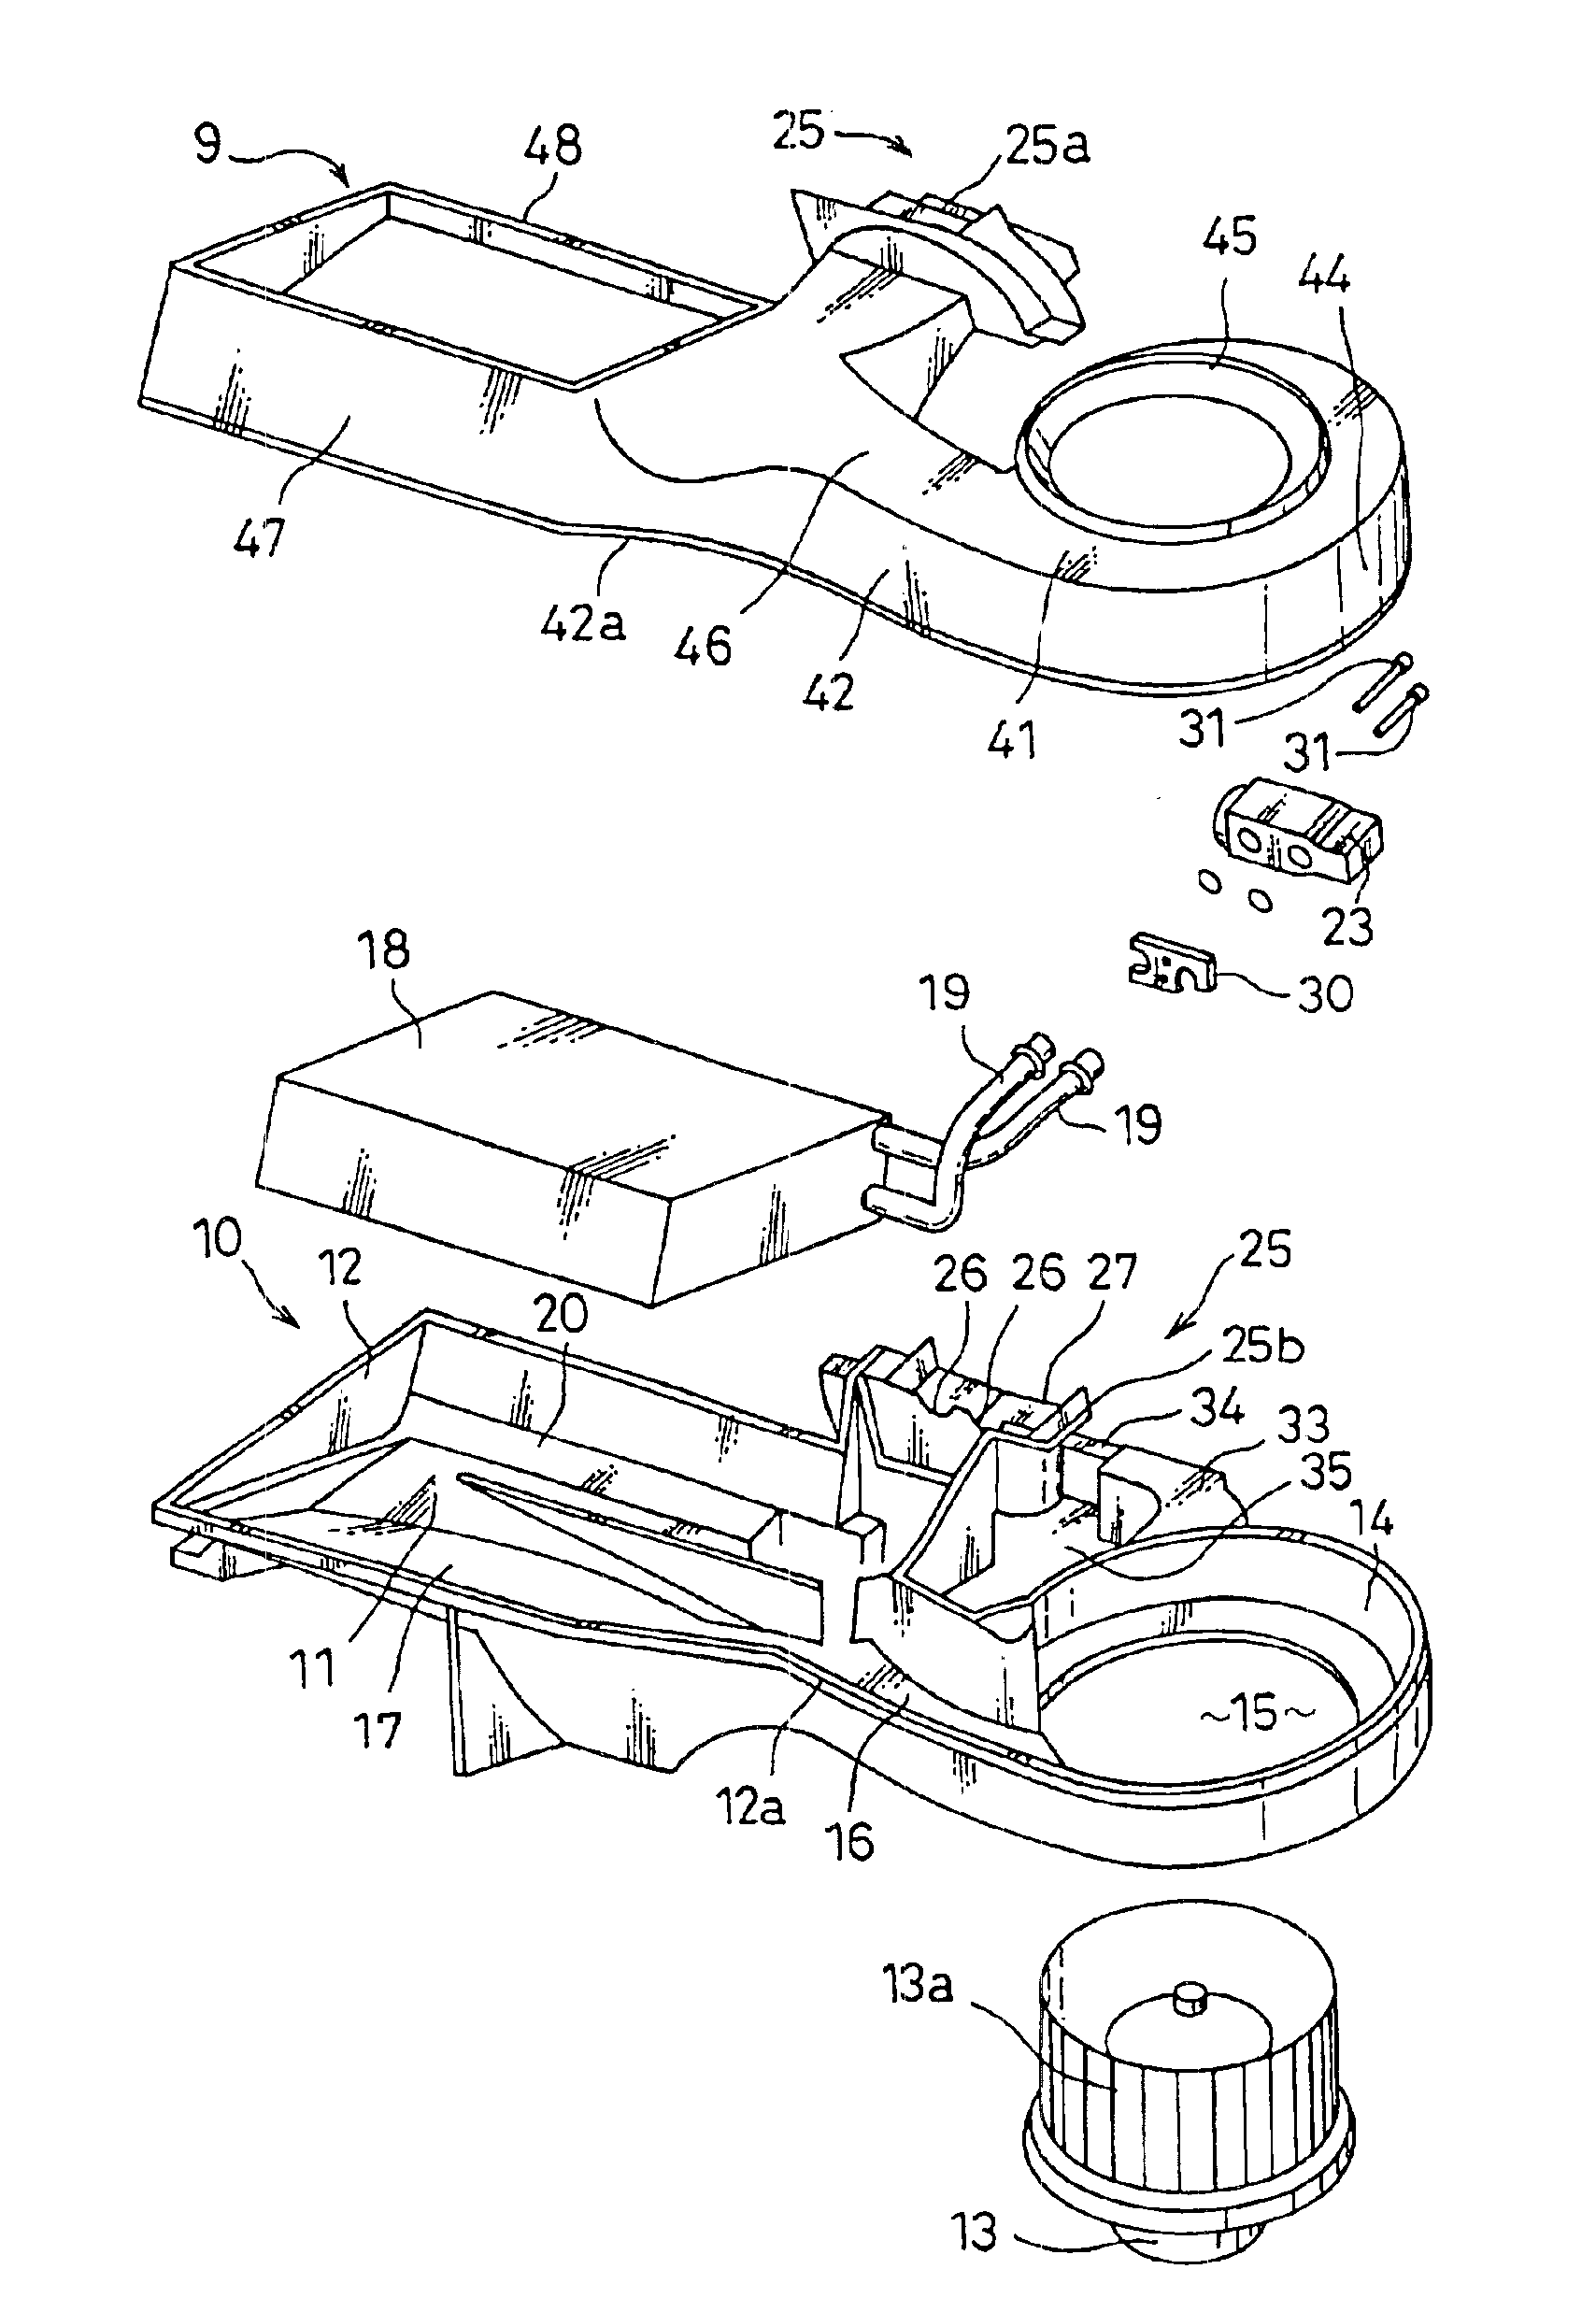 Air-conditioning system for vehicles